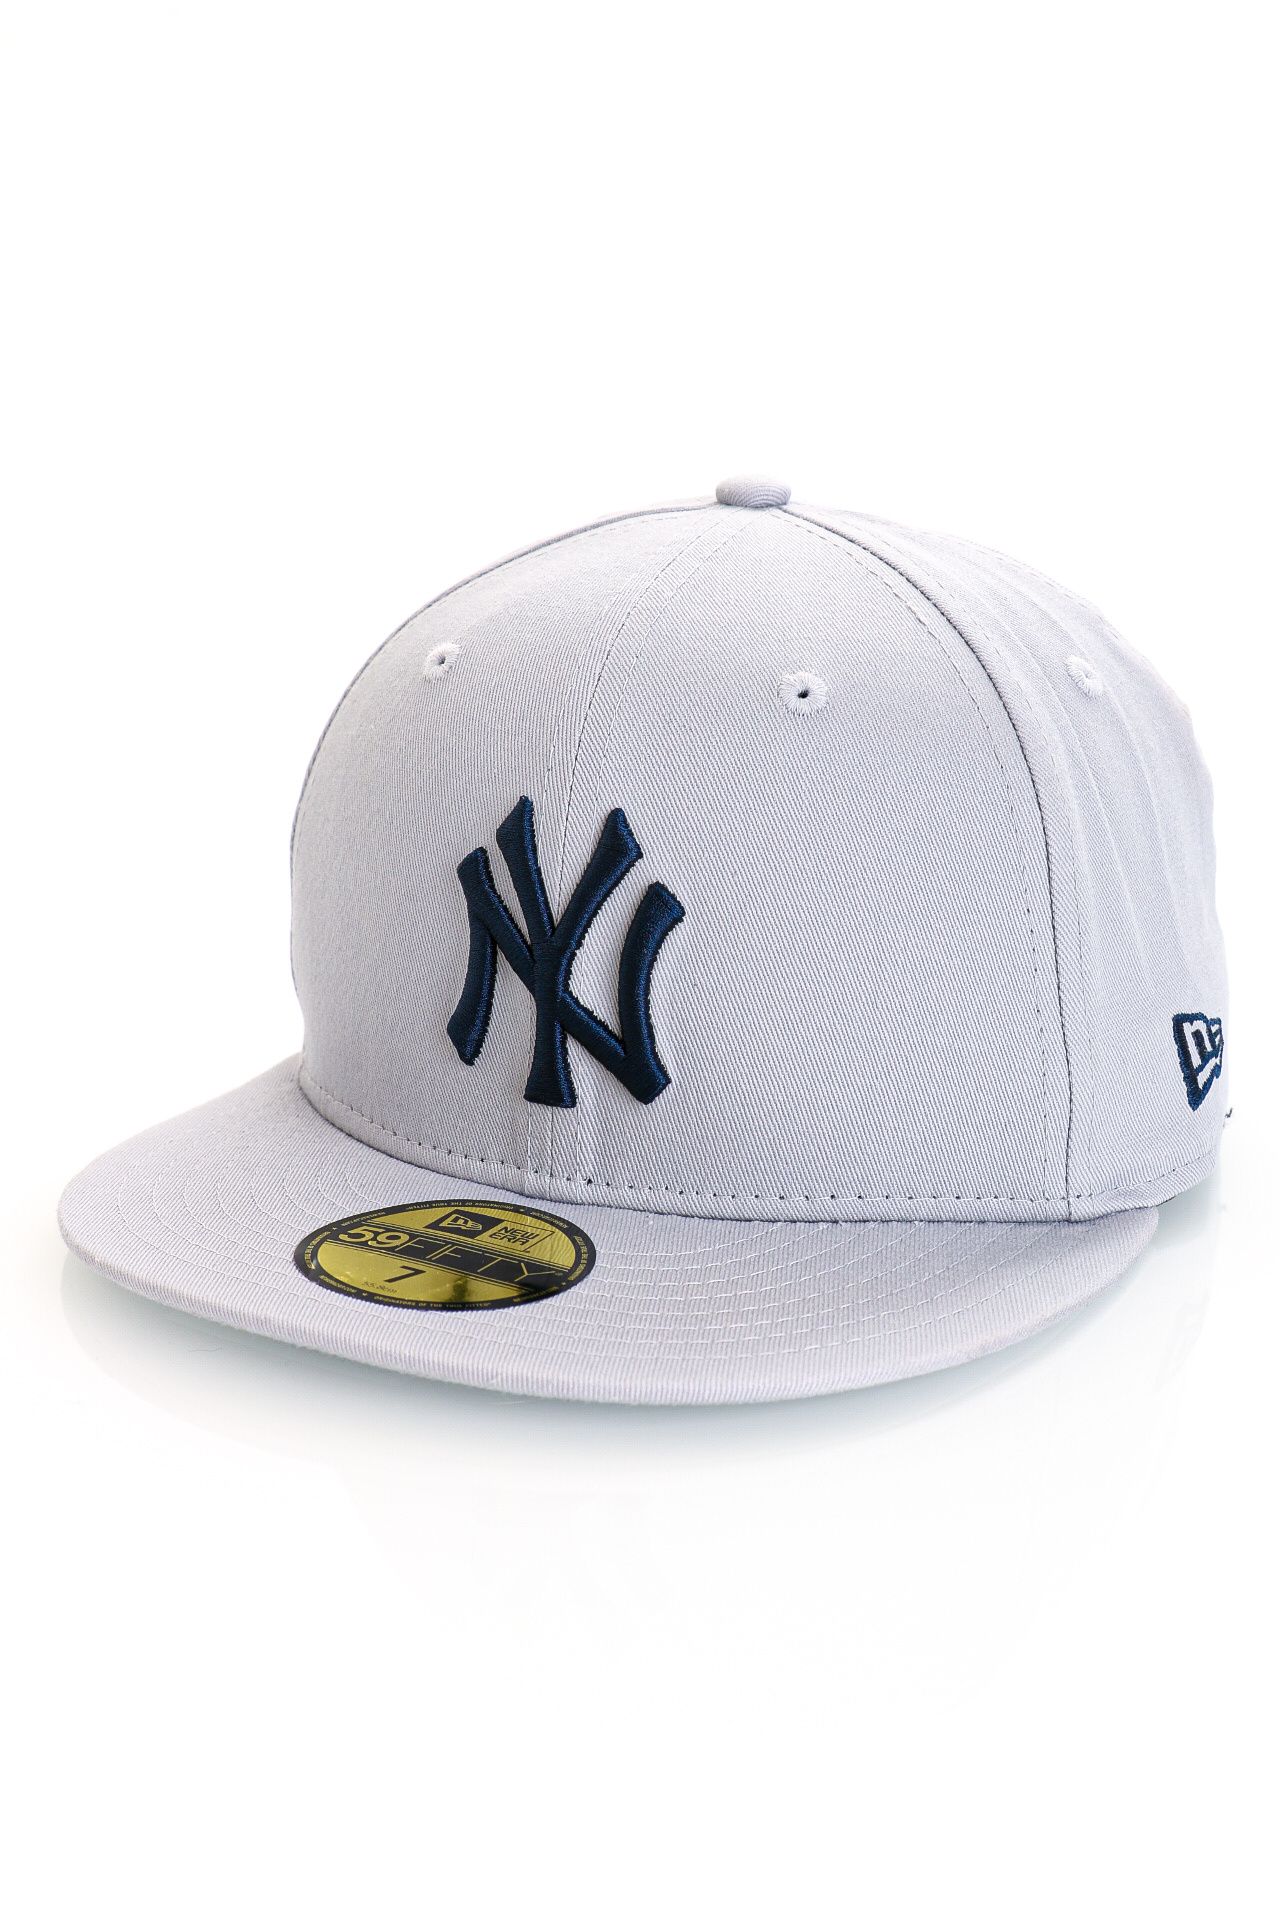 Afbeelding van New Era Fitted Cap NEW YORK YAMKEES SIDE PATCH WORLD SERIES 59FIFTY GRAPHITE NE60284945